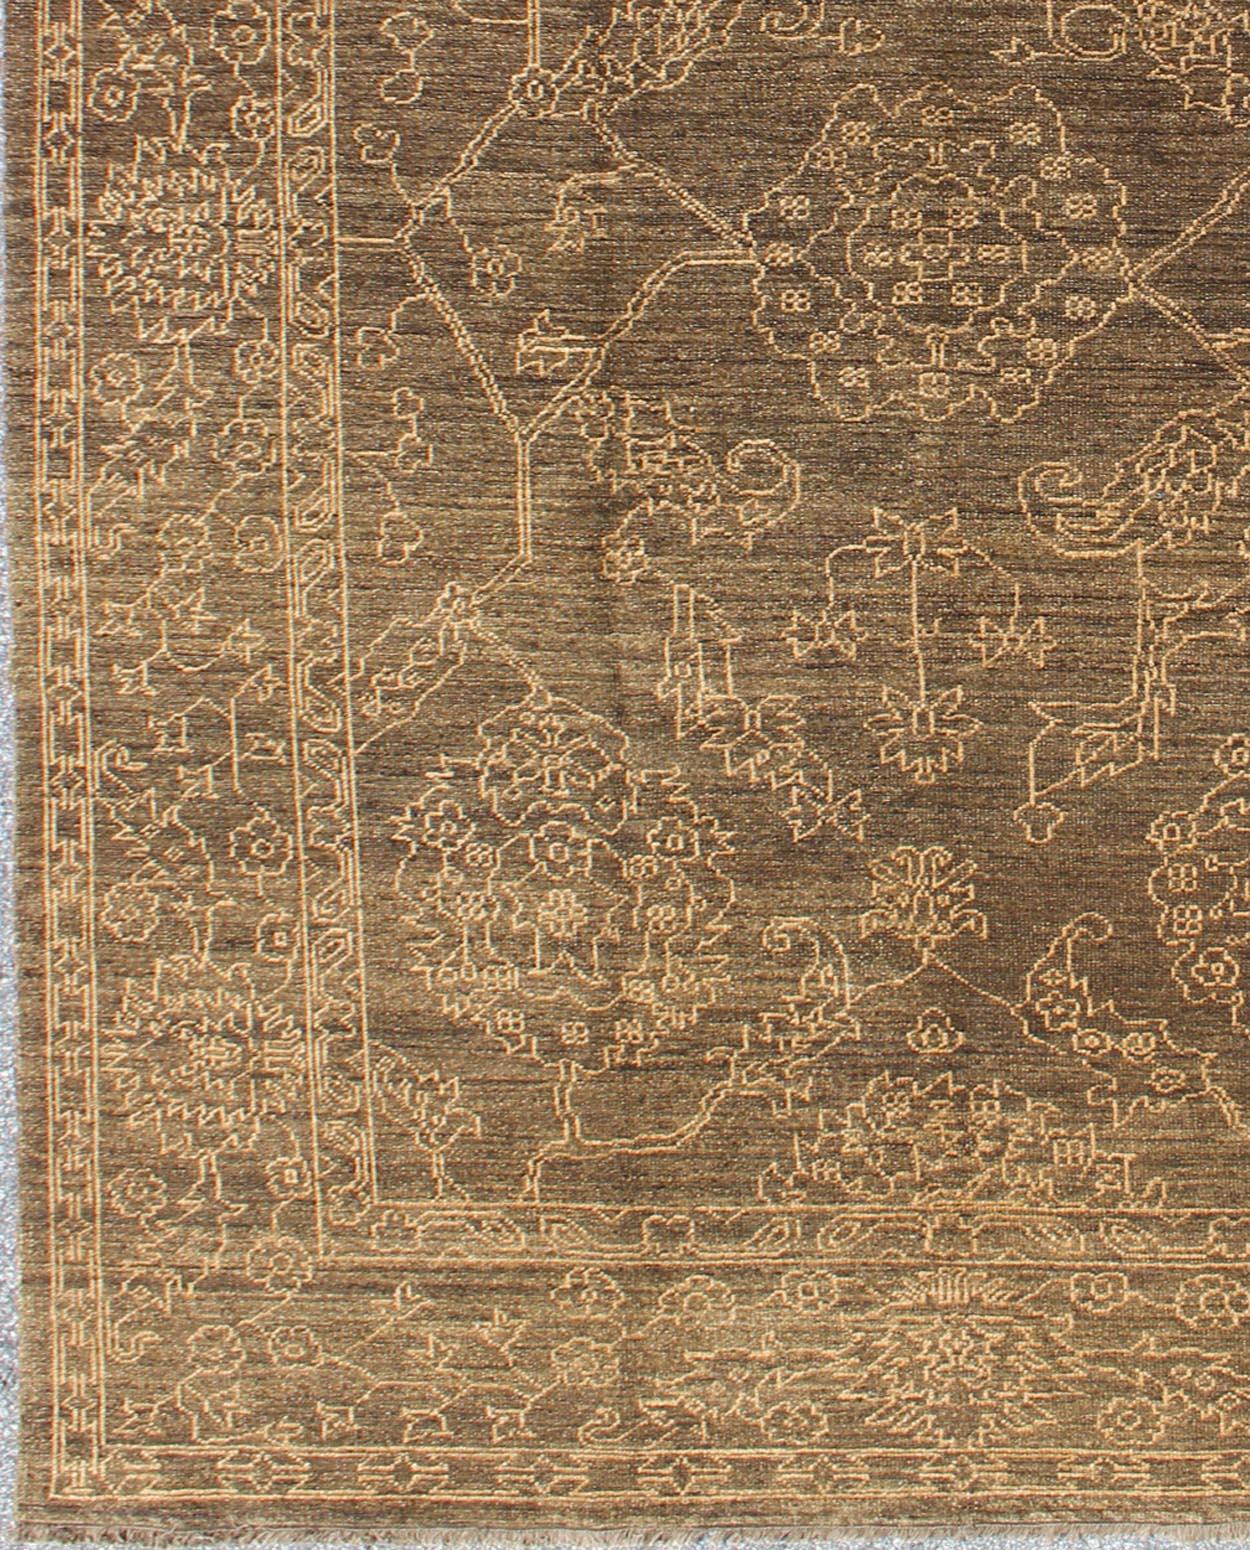 Modern Fine Transitional Rug with Stylized Geometric Motifs in Brown and Light Tan For Sale